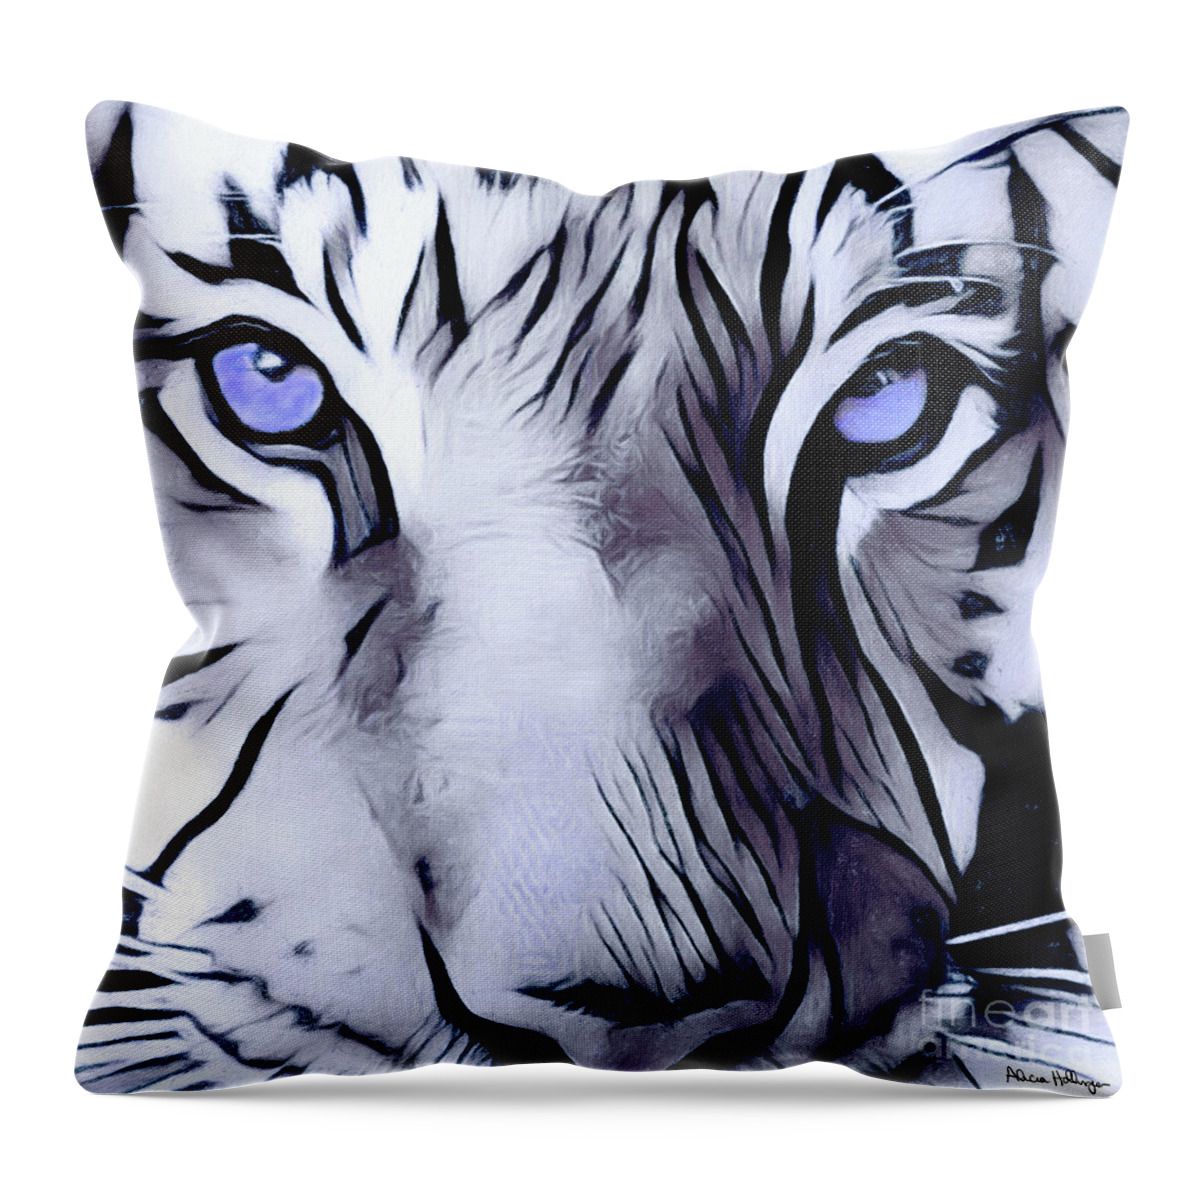 Blue-eyed Throw Pillow featuring the painting Blue Eyed Tiger by Alicia Hollinger